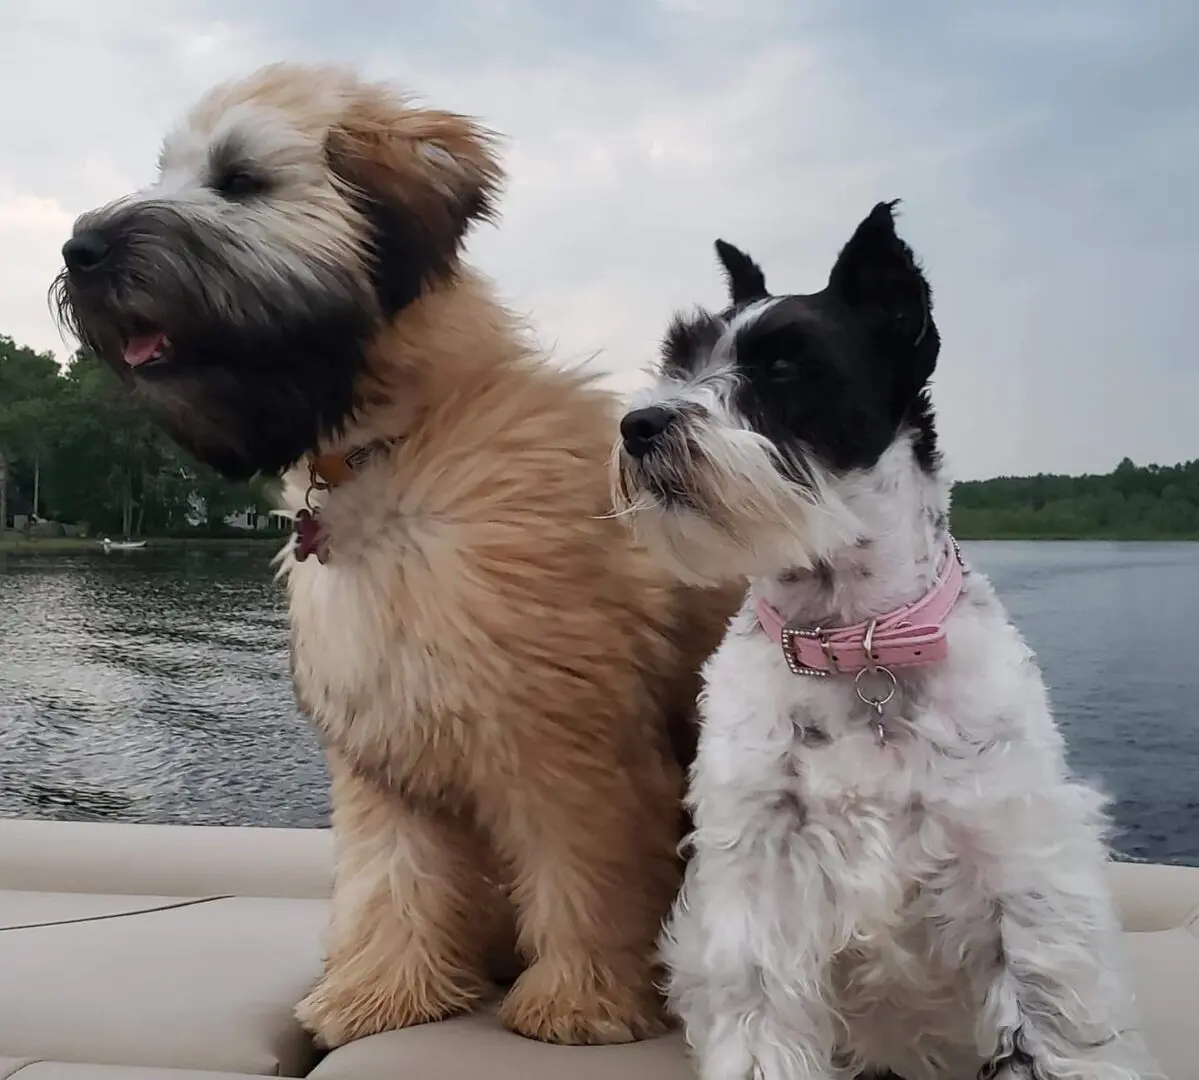 Two dogs sitting on a boat in the water.